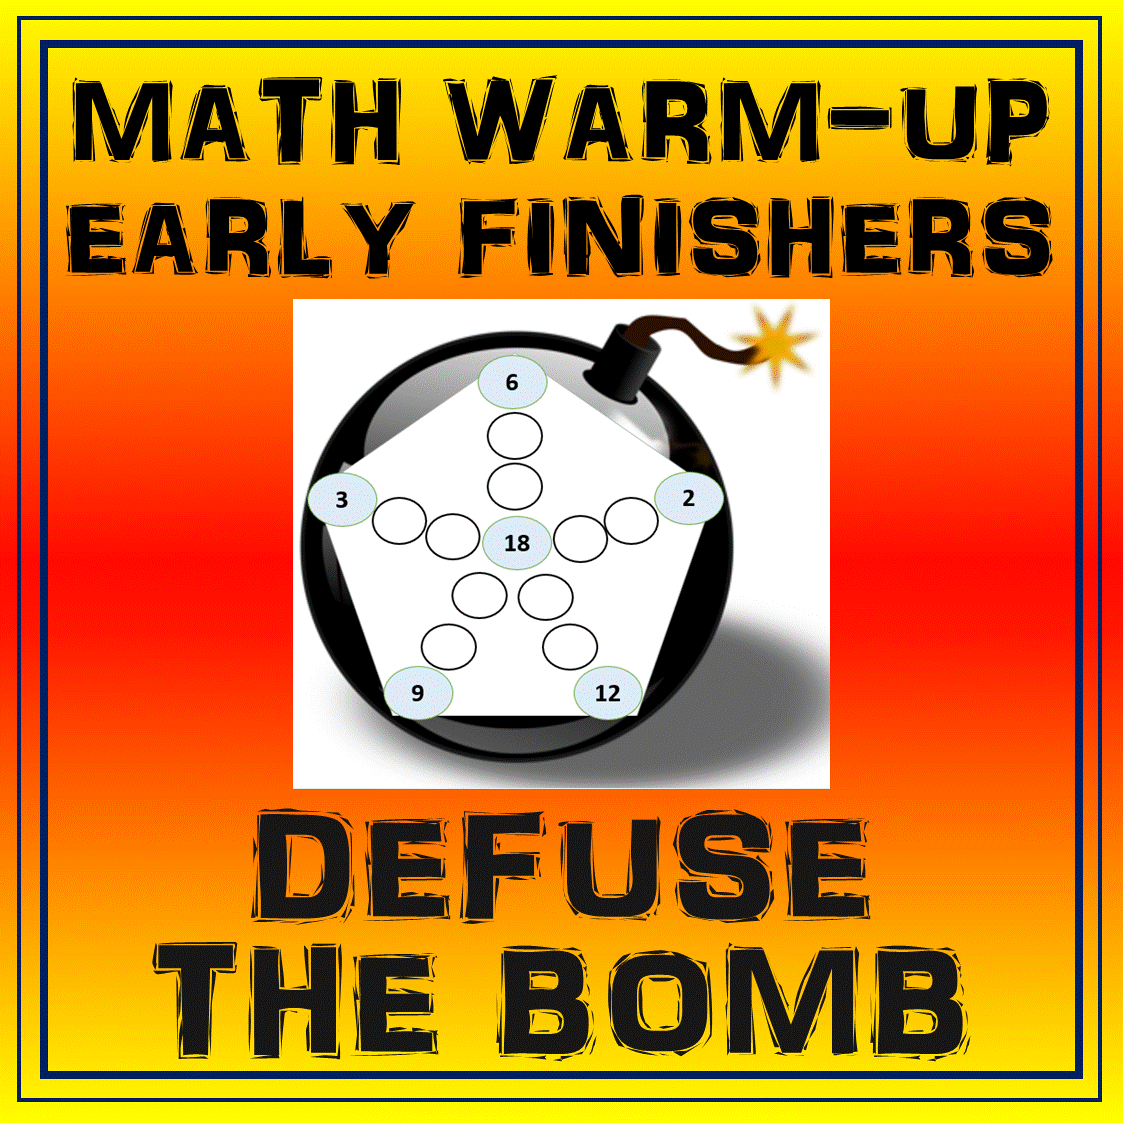 A fun math early finishers activity, defuse the bomb. A fun number puzzle which your kids will love, it can be used as a warm-up or early finisher activity. These awesome worksheets will provide a fun learning experience for your students and can be used with both elementary or middle school students. #mathactivities #fun #numberpuzzle #grade6 #grade5 #grade7 #earlyfinihsers #mathwarmup